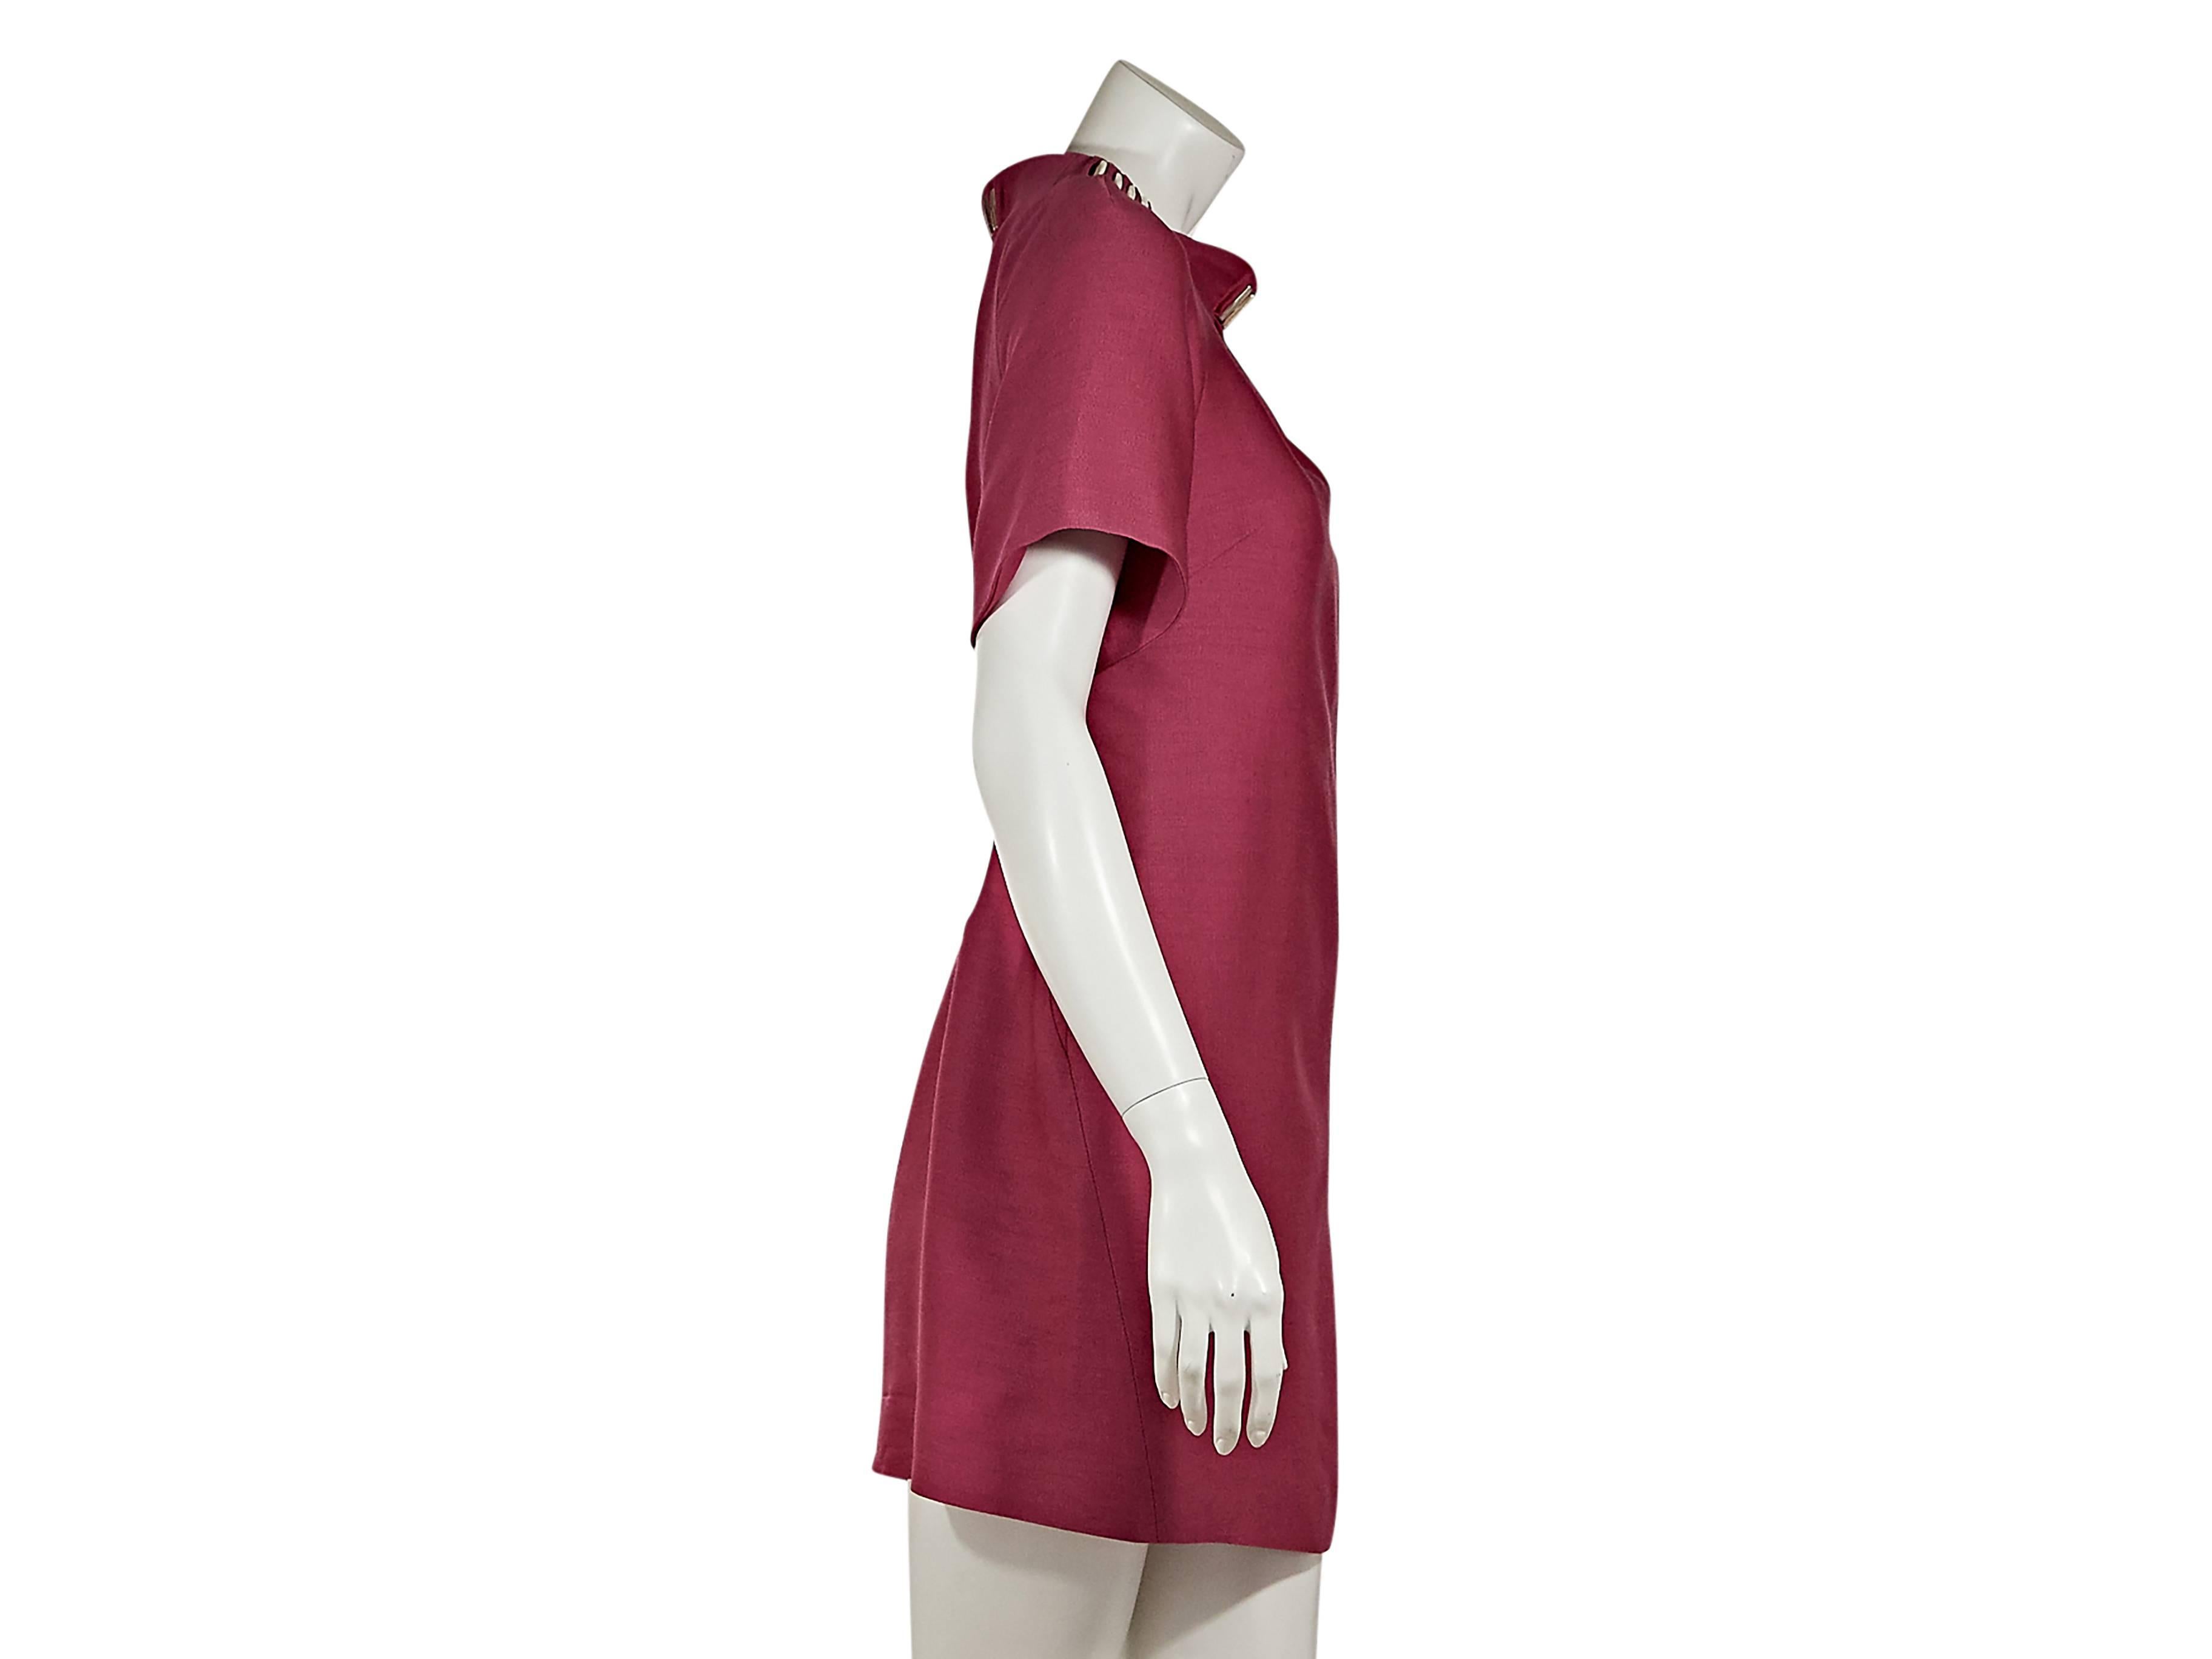 Pink silk and wool blend shift dress by Versace.  Crewneck.  Gathered pleats accent neckline.  Short sleeves.  Cutout back.  